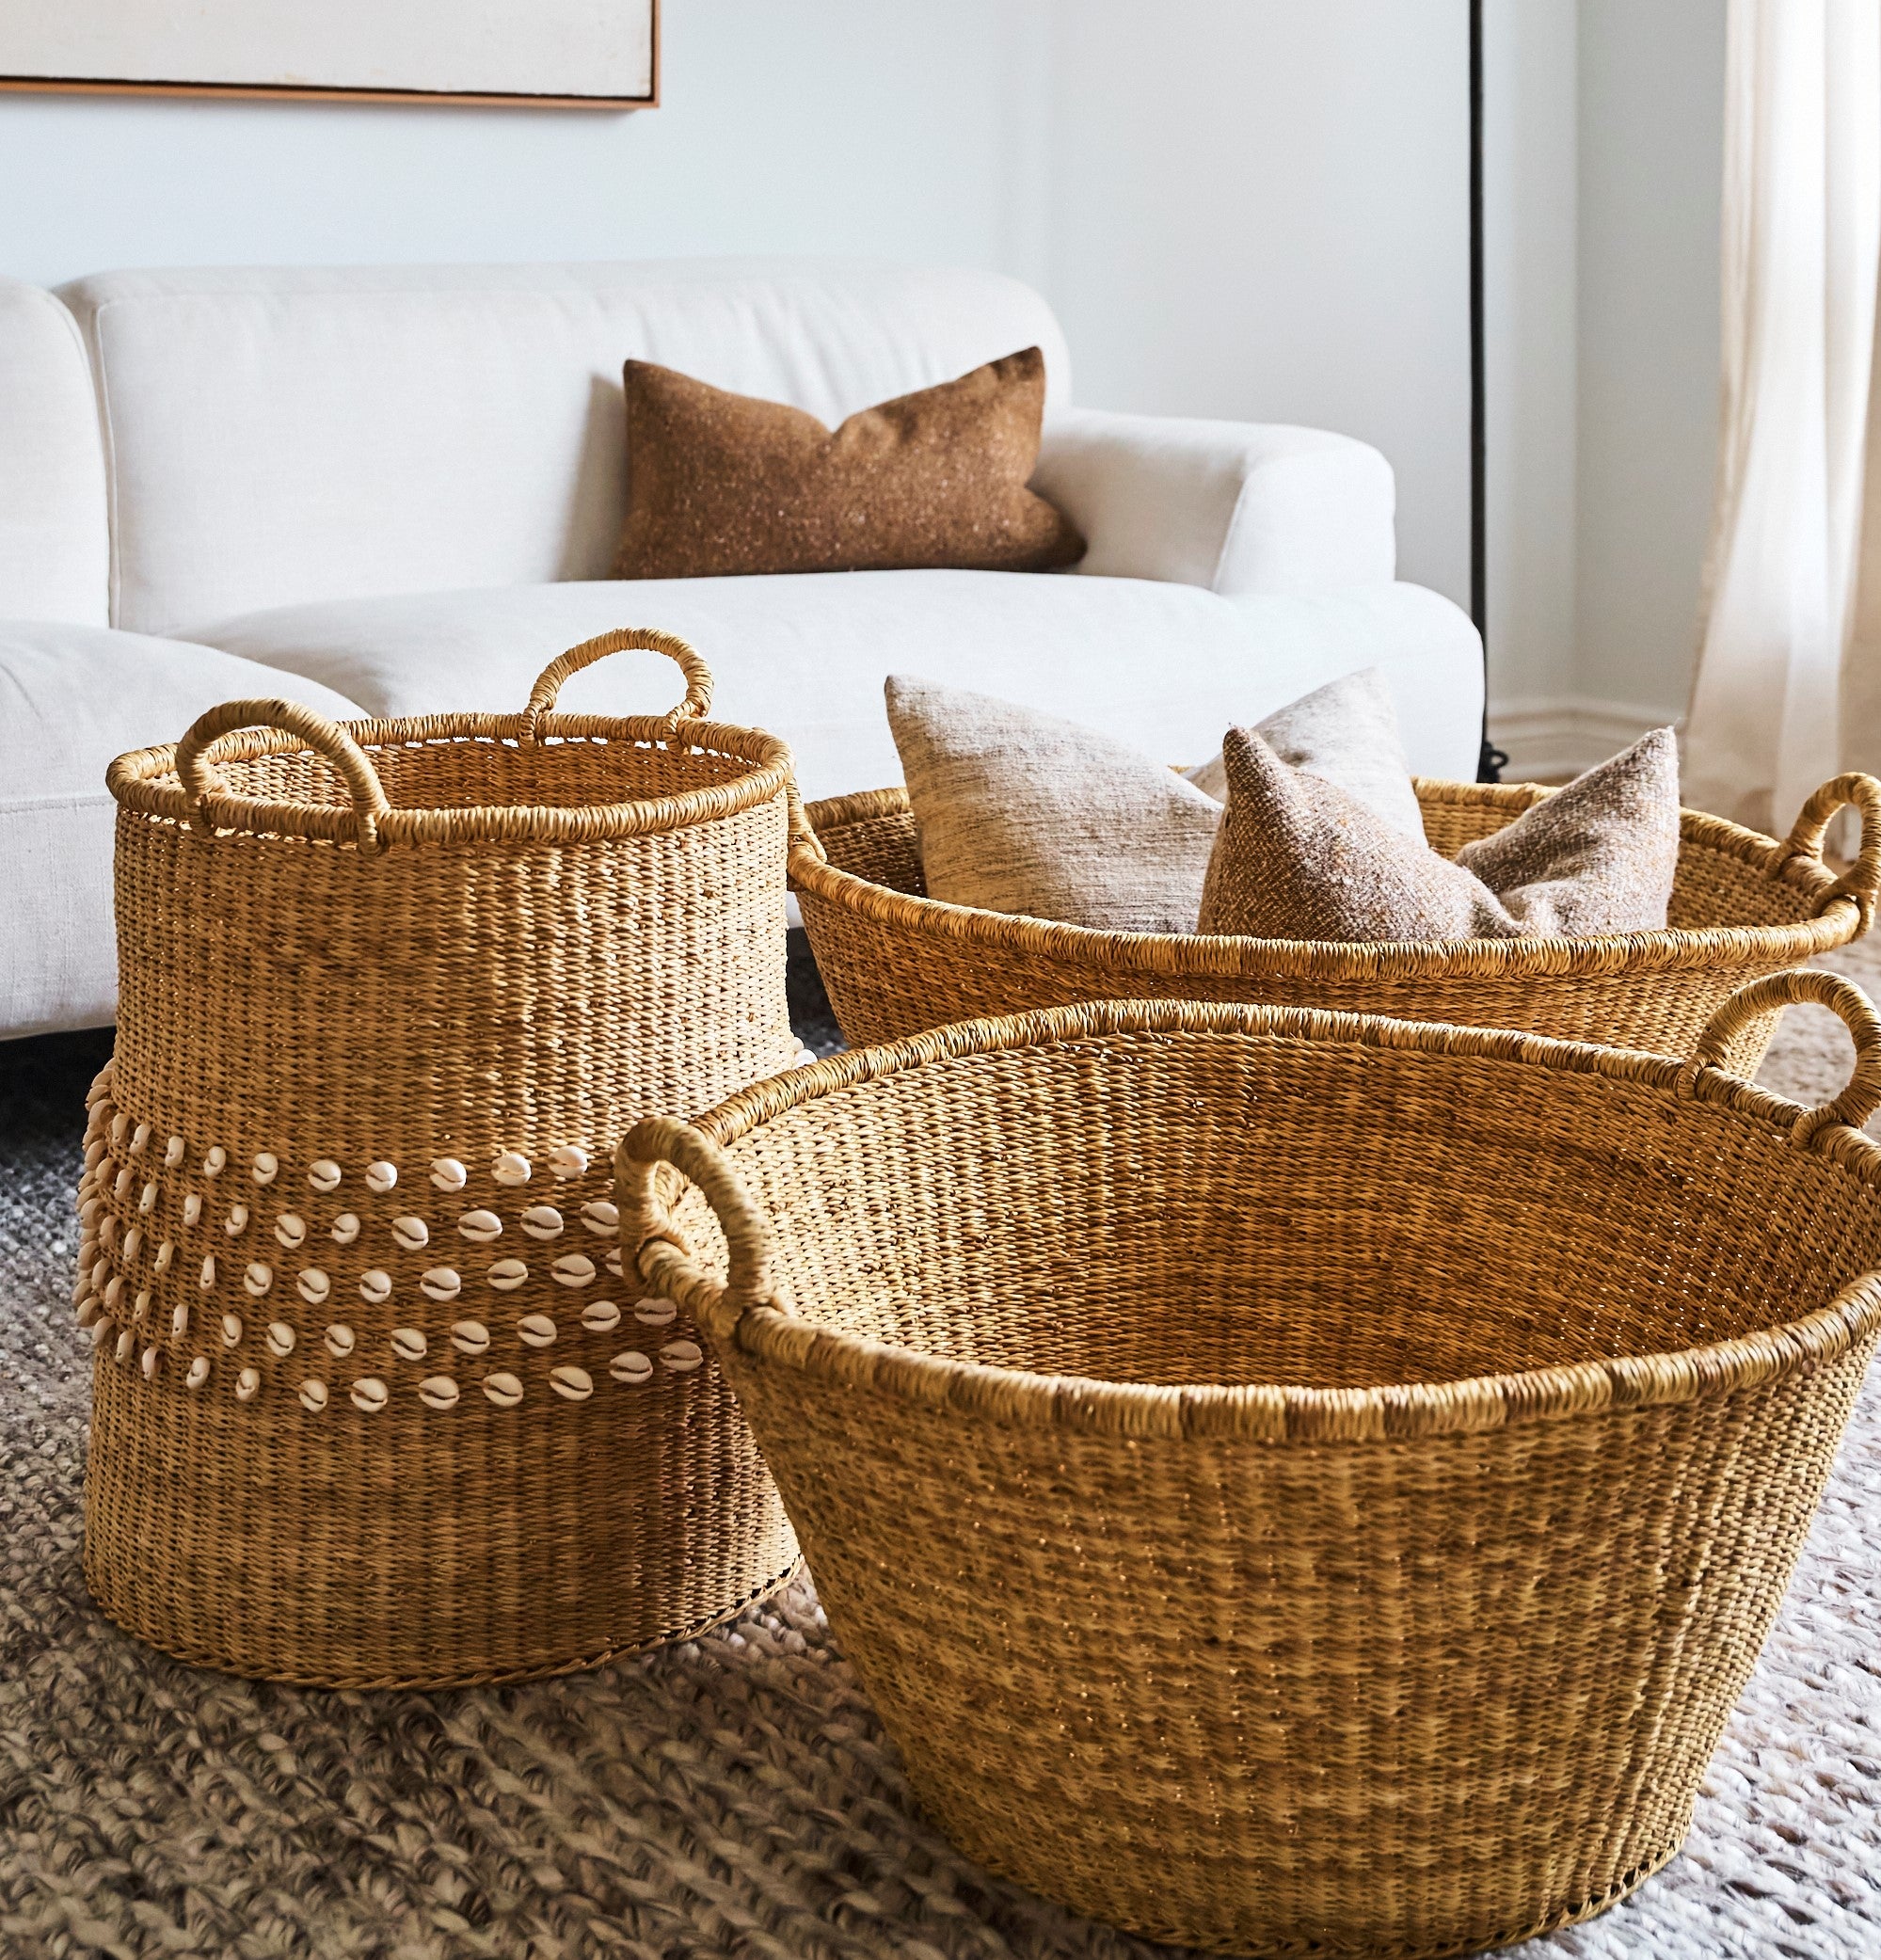 three sustainable woven baskets in a living room